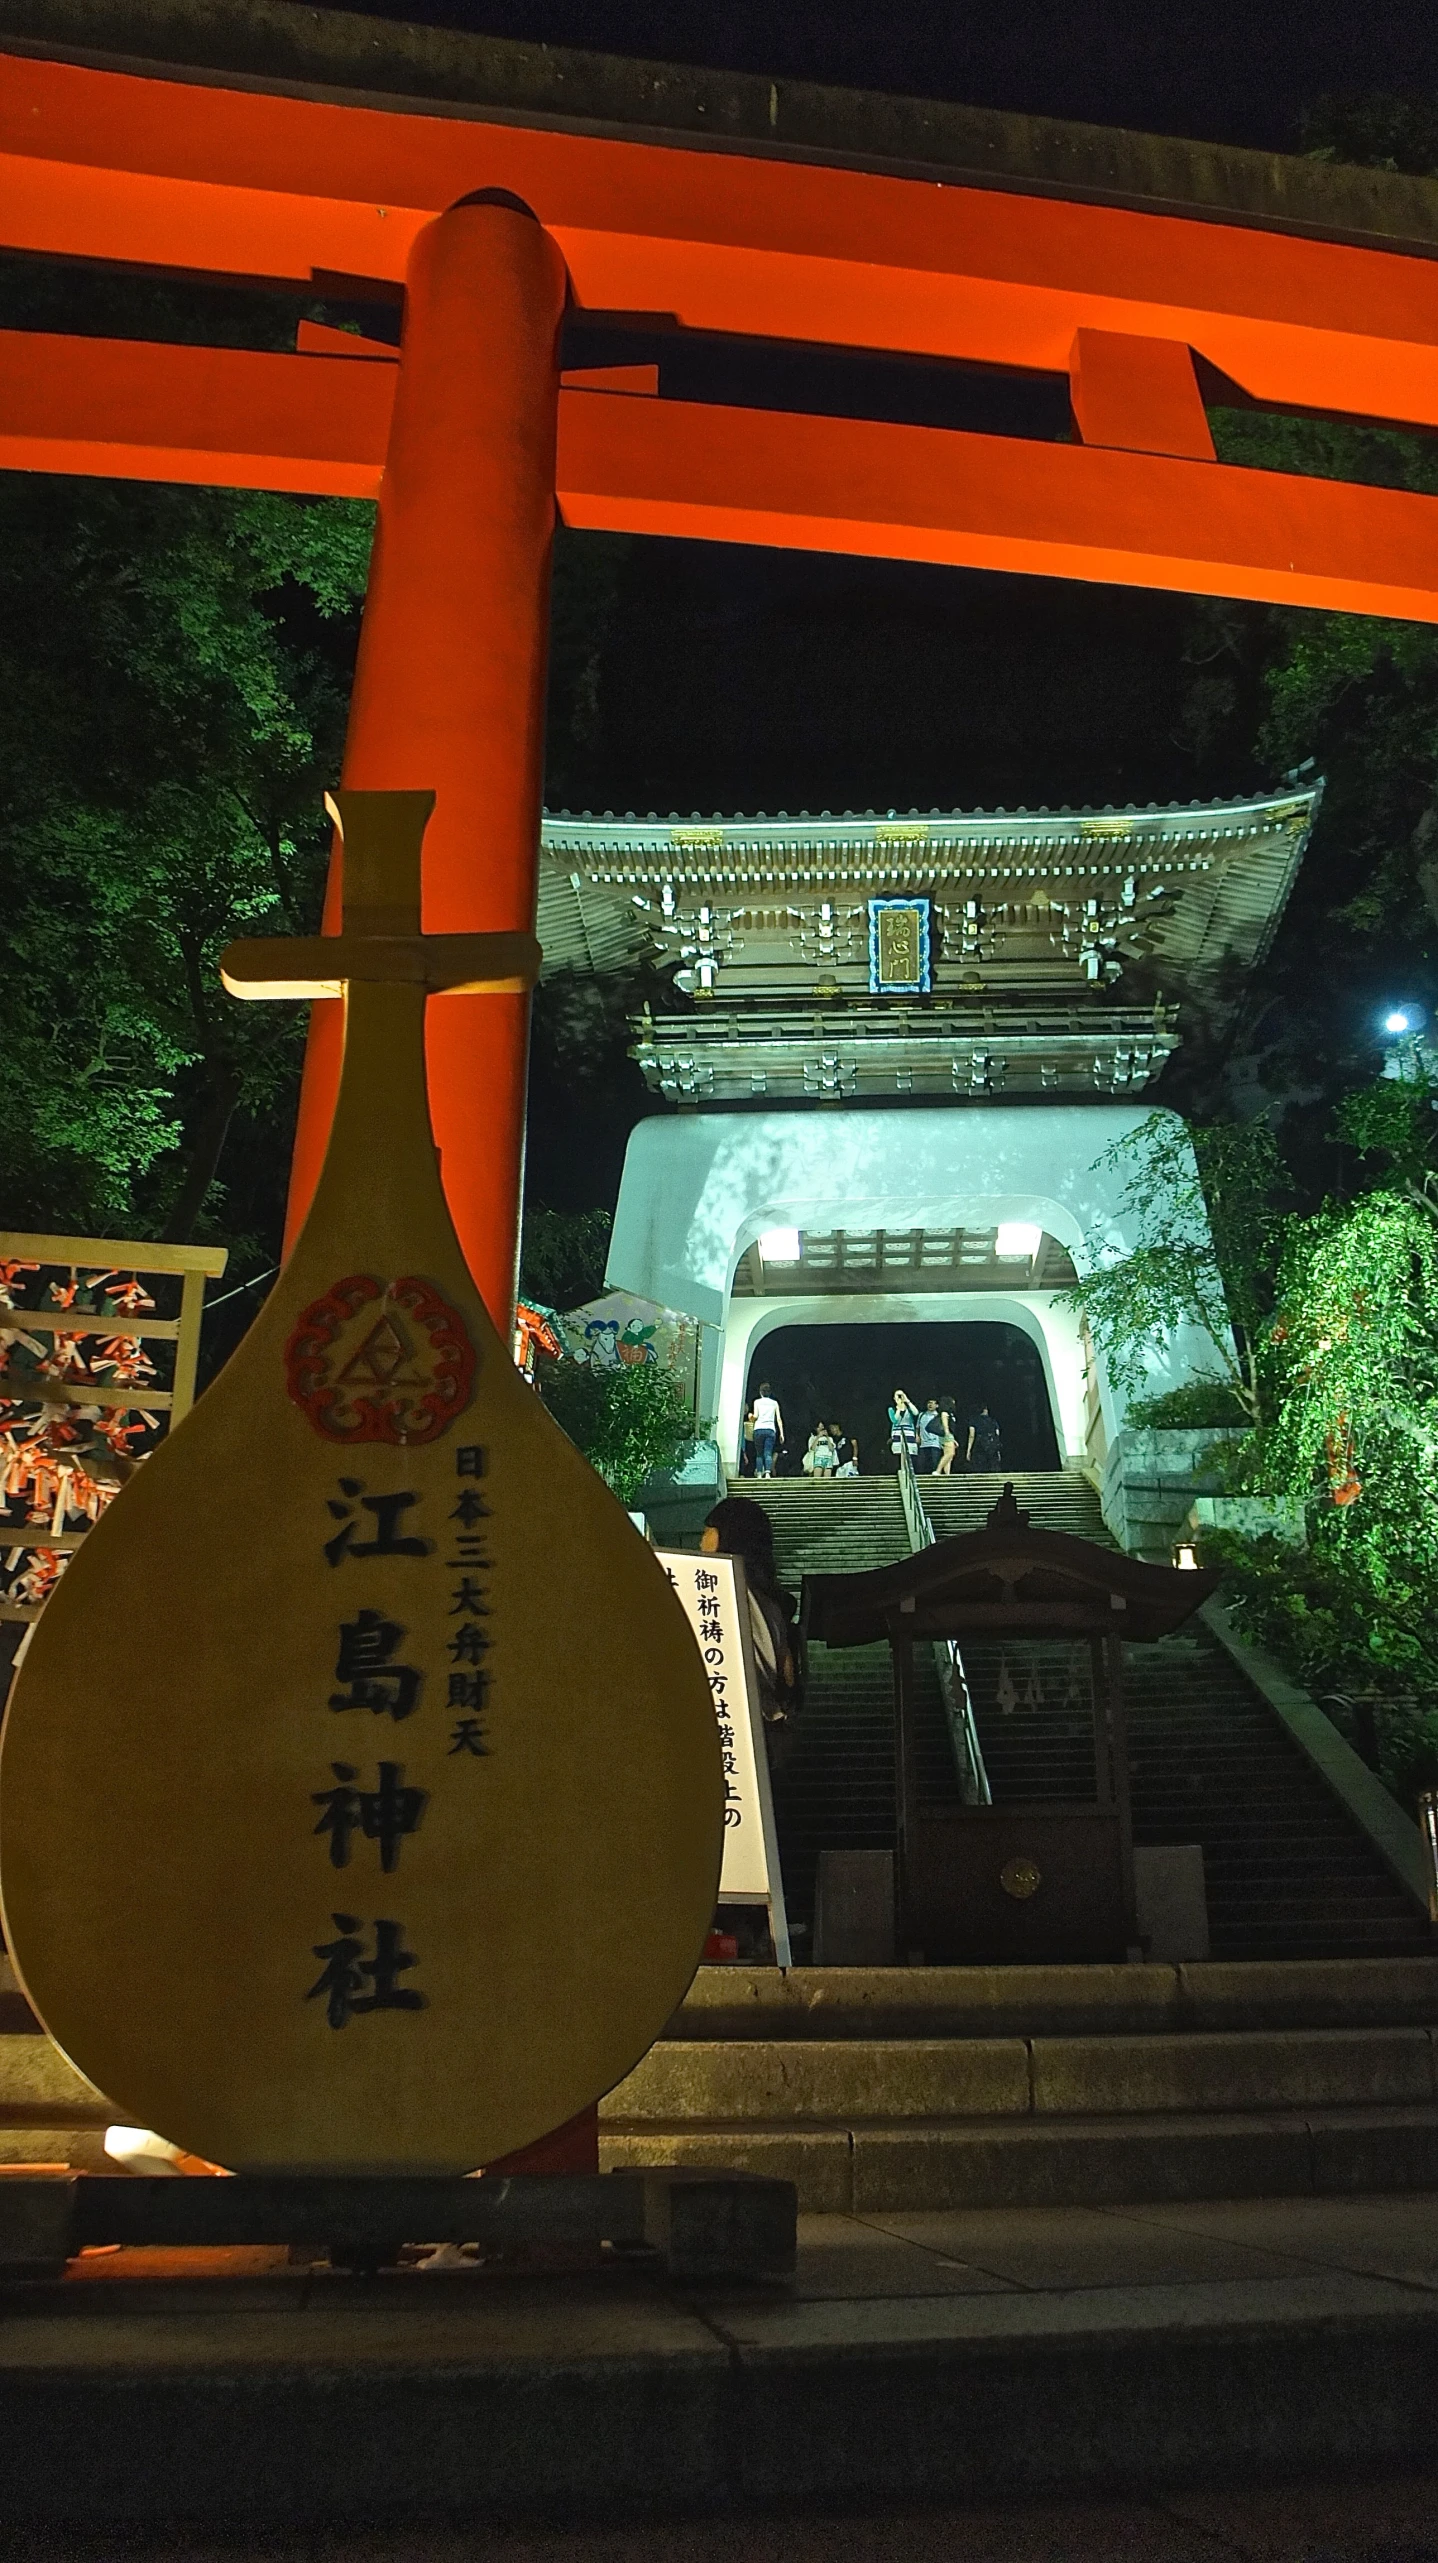 a shrine surrounded by steps and trees in the night